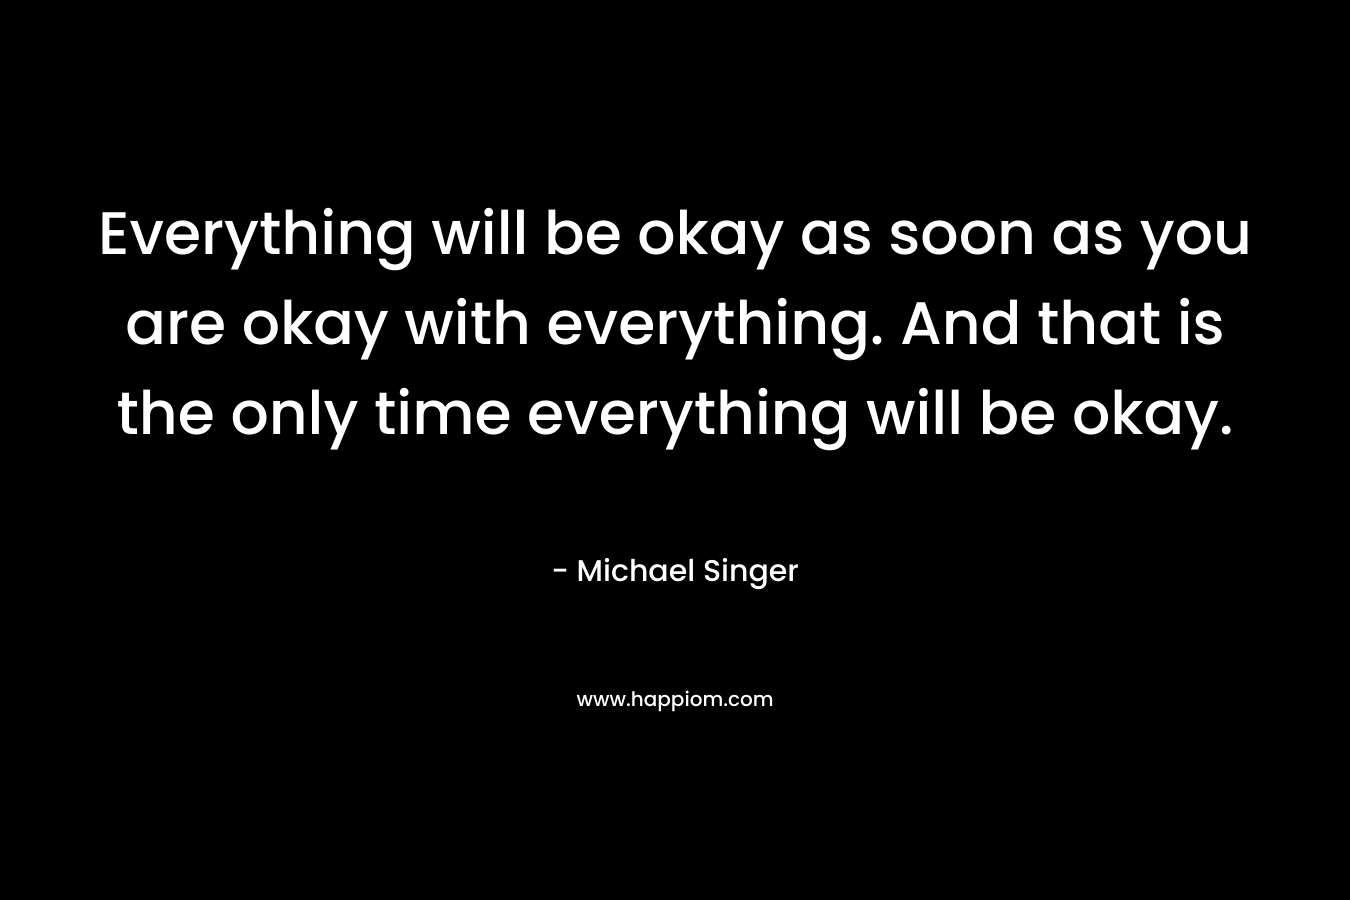 Everything will be okay as soon as you are okay with everything. And that is the only time everything will be okay.